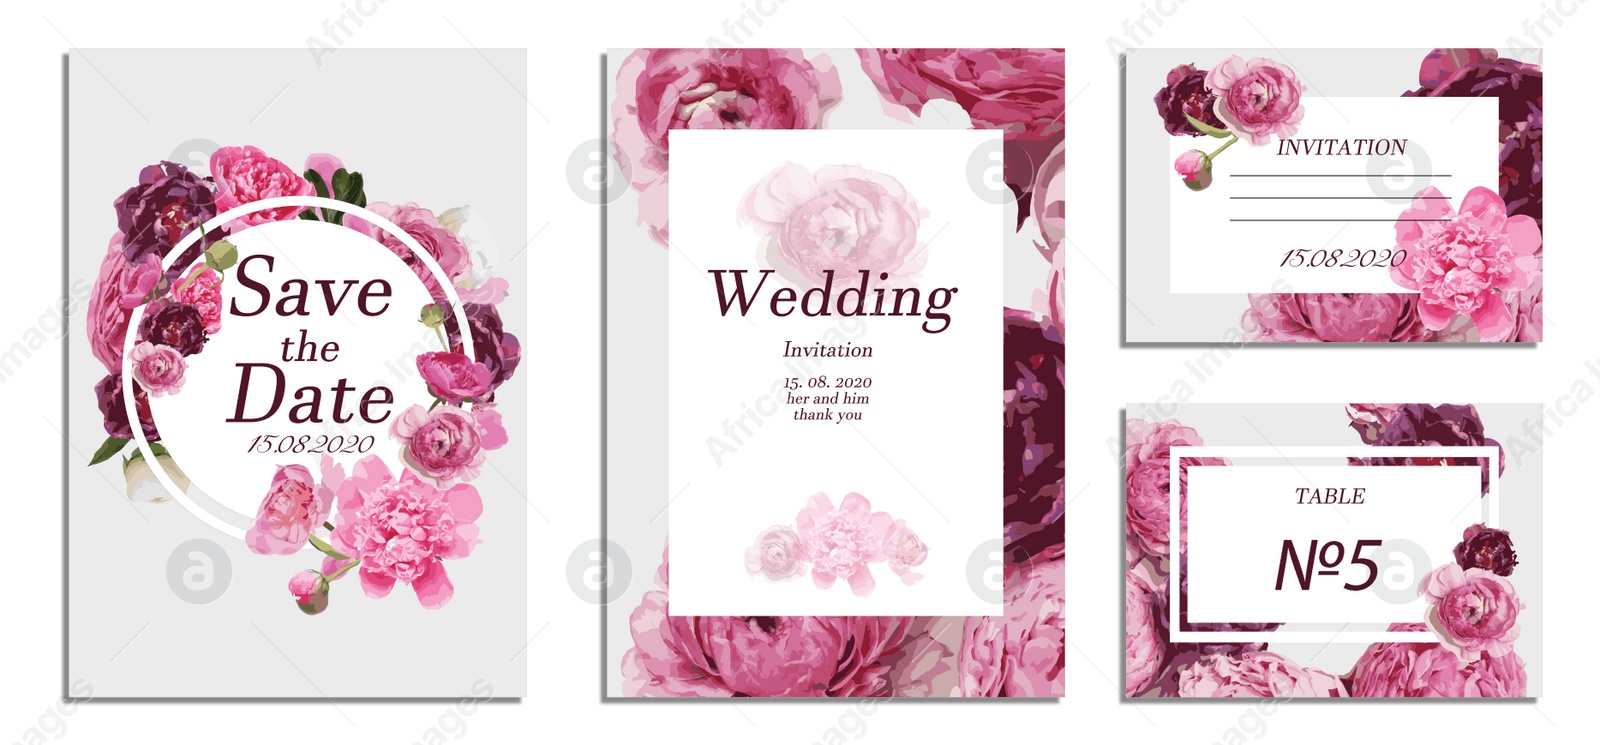 Image of Beautiful wedding invitations and cards with floral design on white background, top view